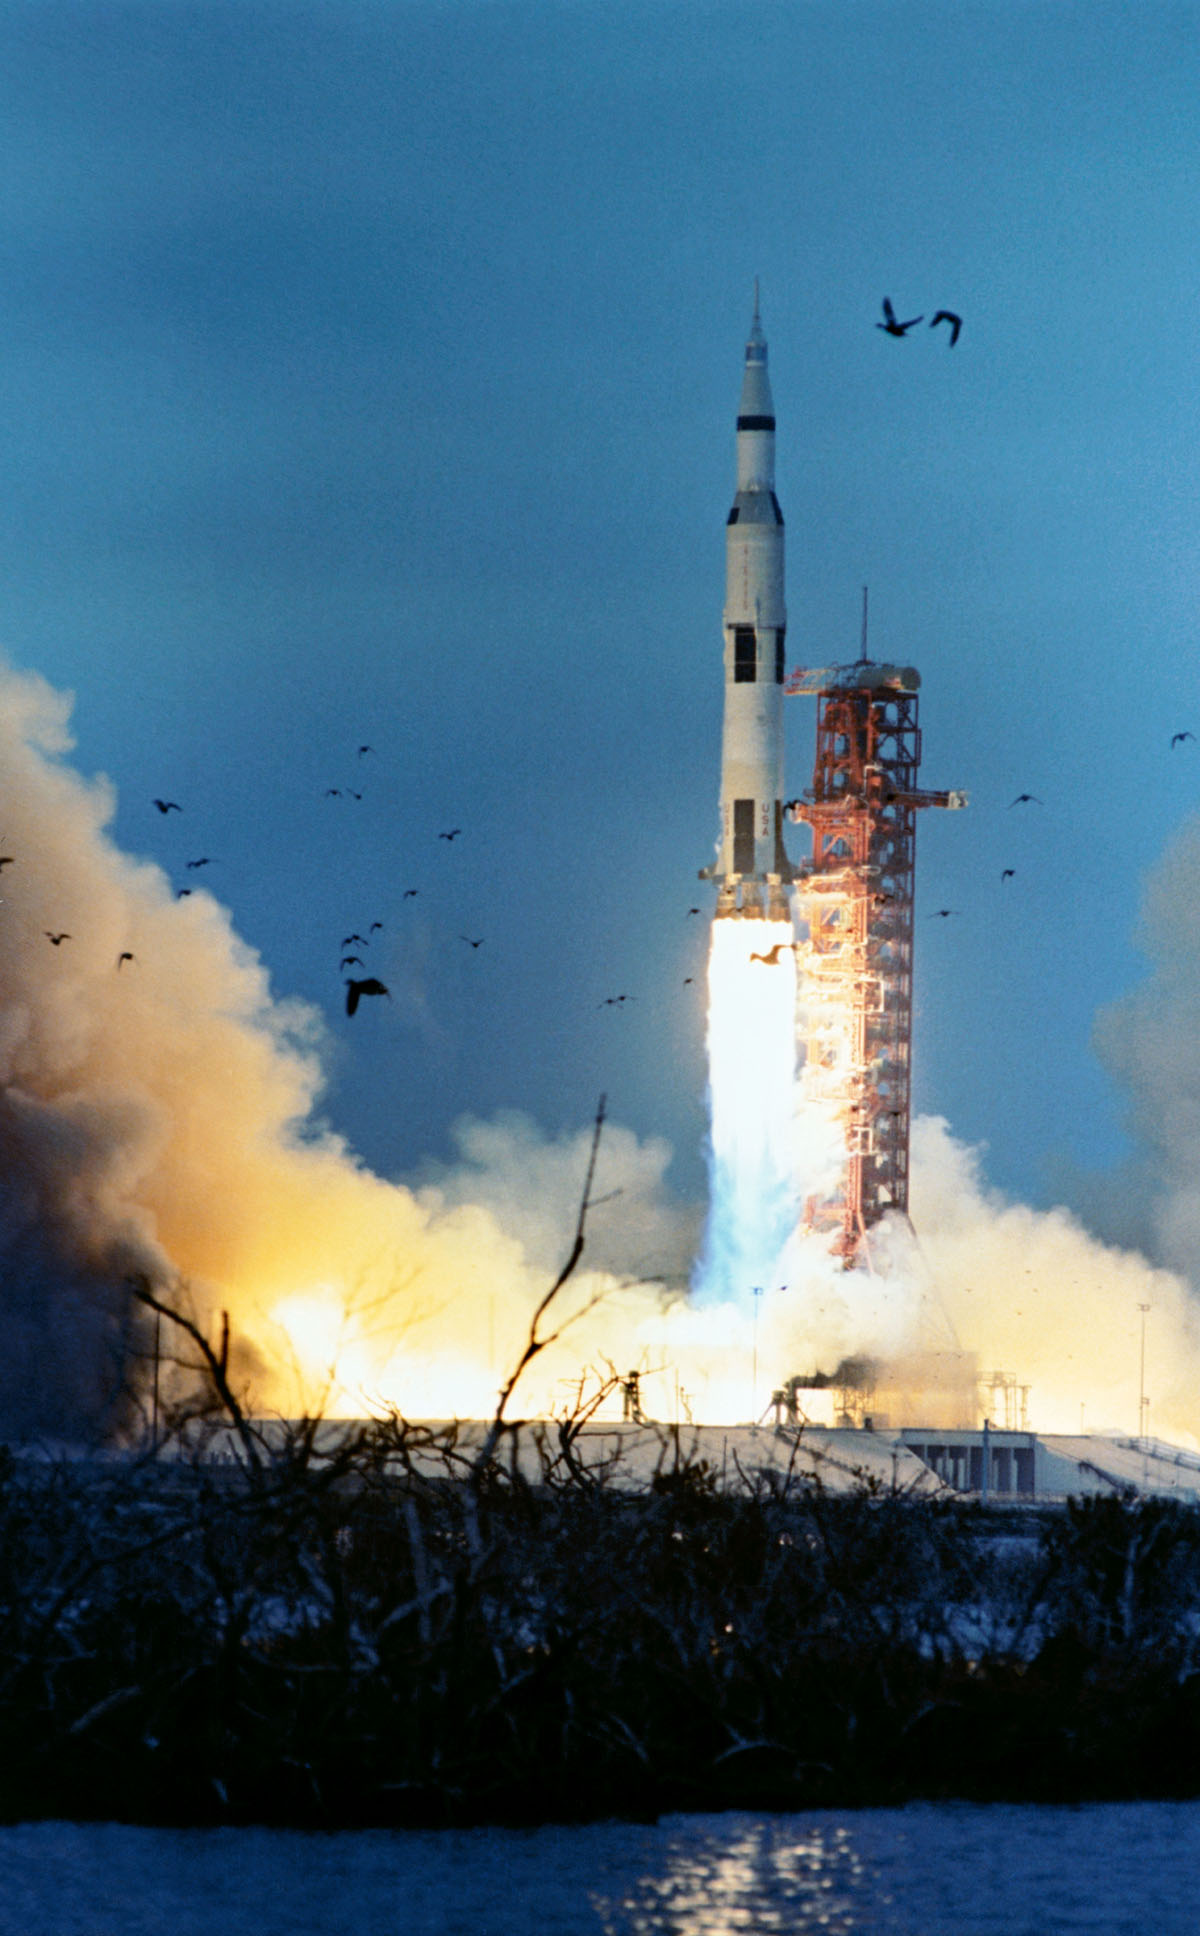 A Brief History Of Animals And Rocket Launches Not Getting Along